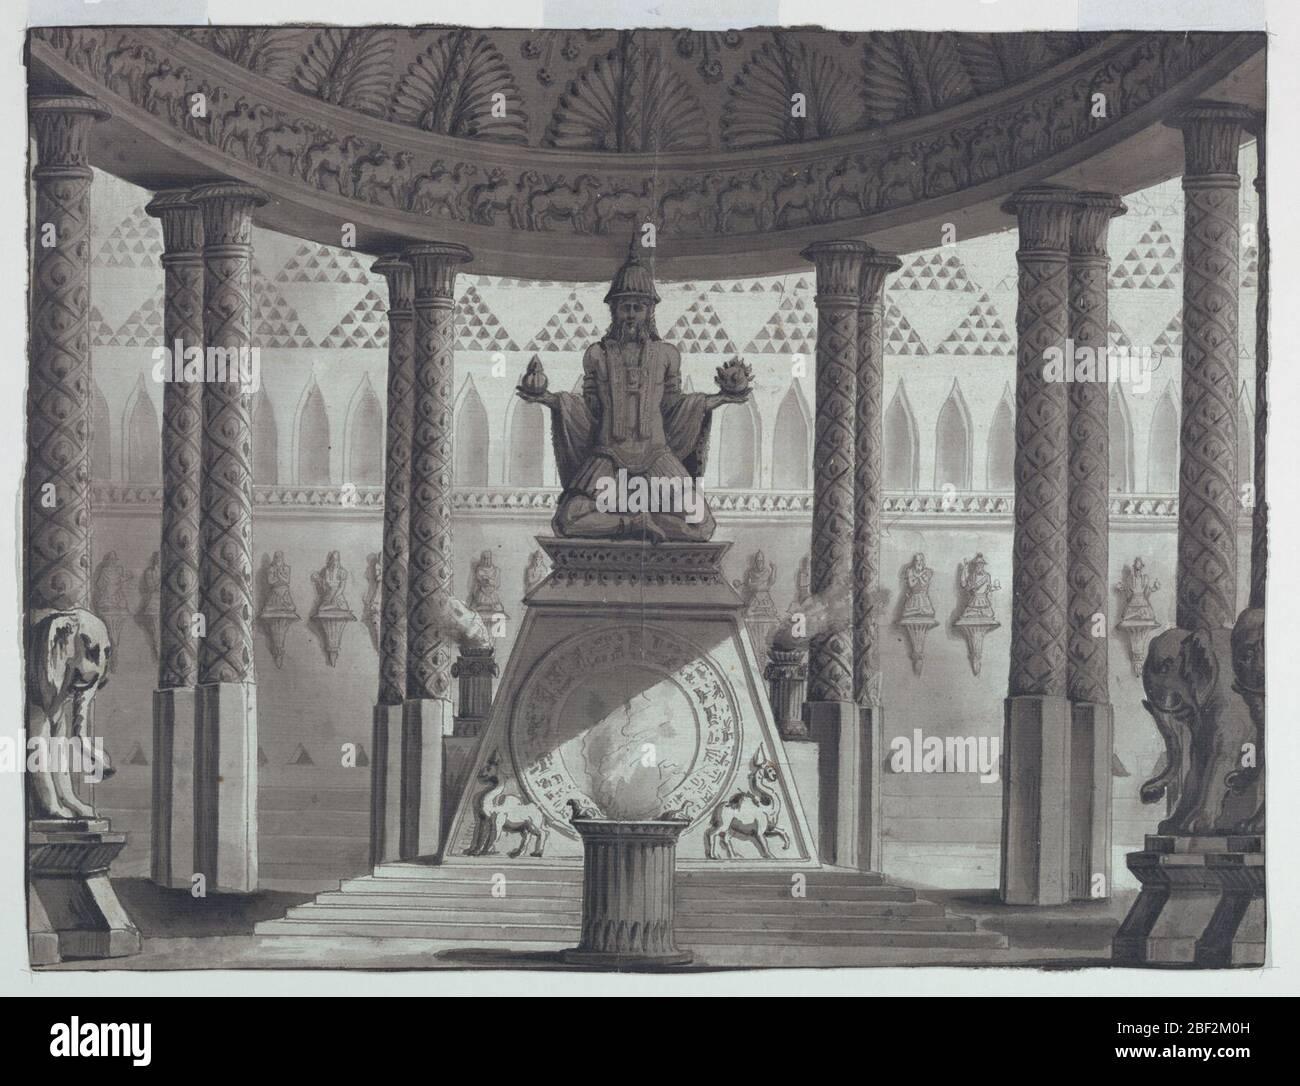 Stage Design Oriental Temple. Horizontal rectangle. Image of god on pedestal int emple. Representations of other gods, elephants, and camels. Incense burning. Stock Photo